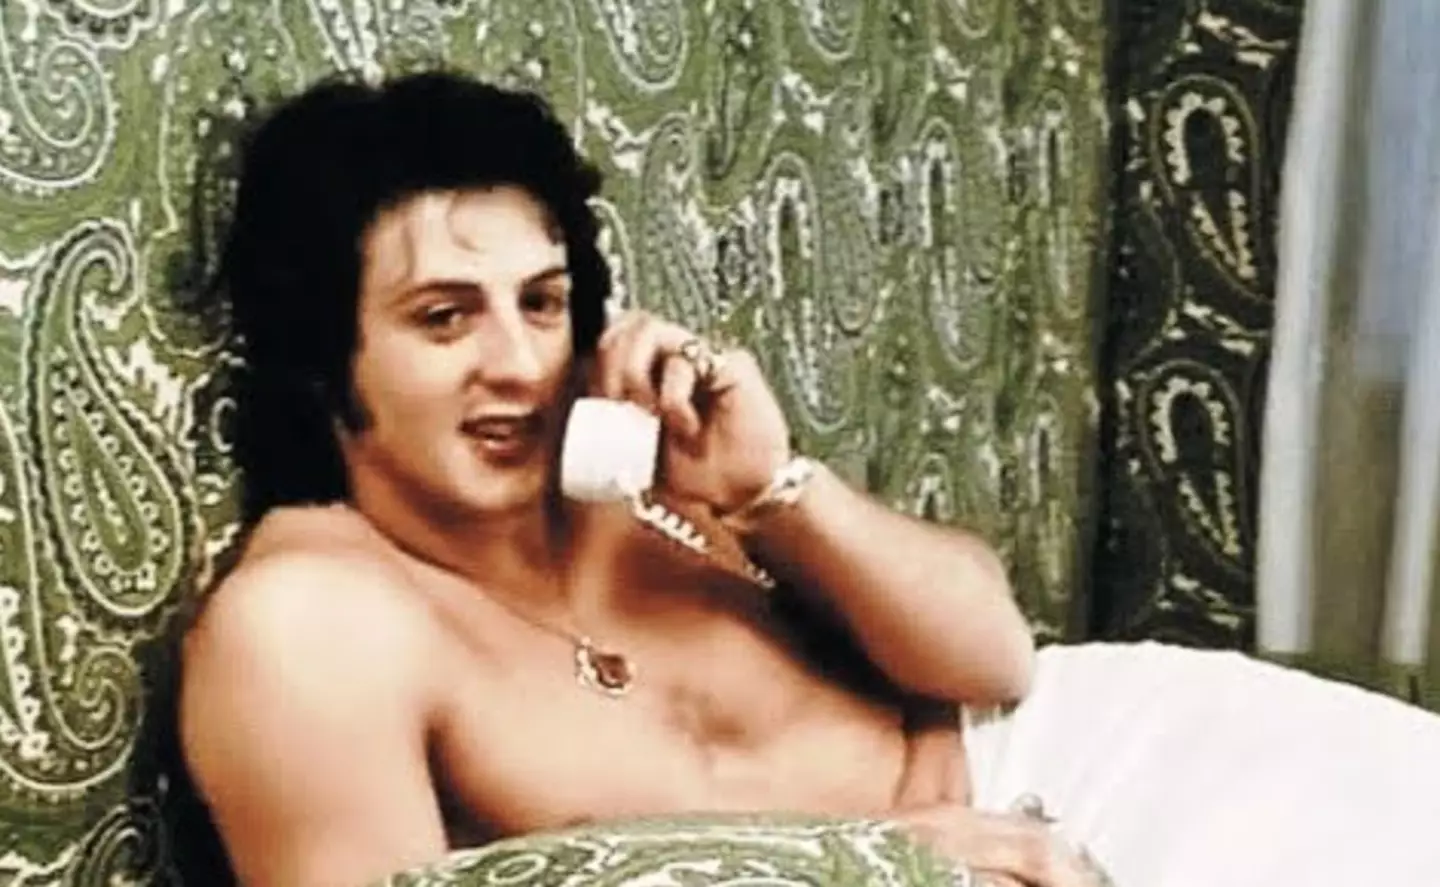 Sylvester Stallone starred in a pornographic film before breaking into Hollywood.